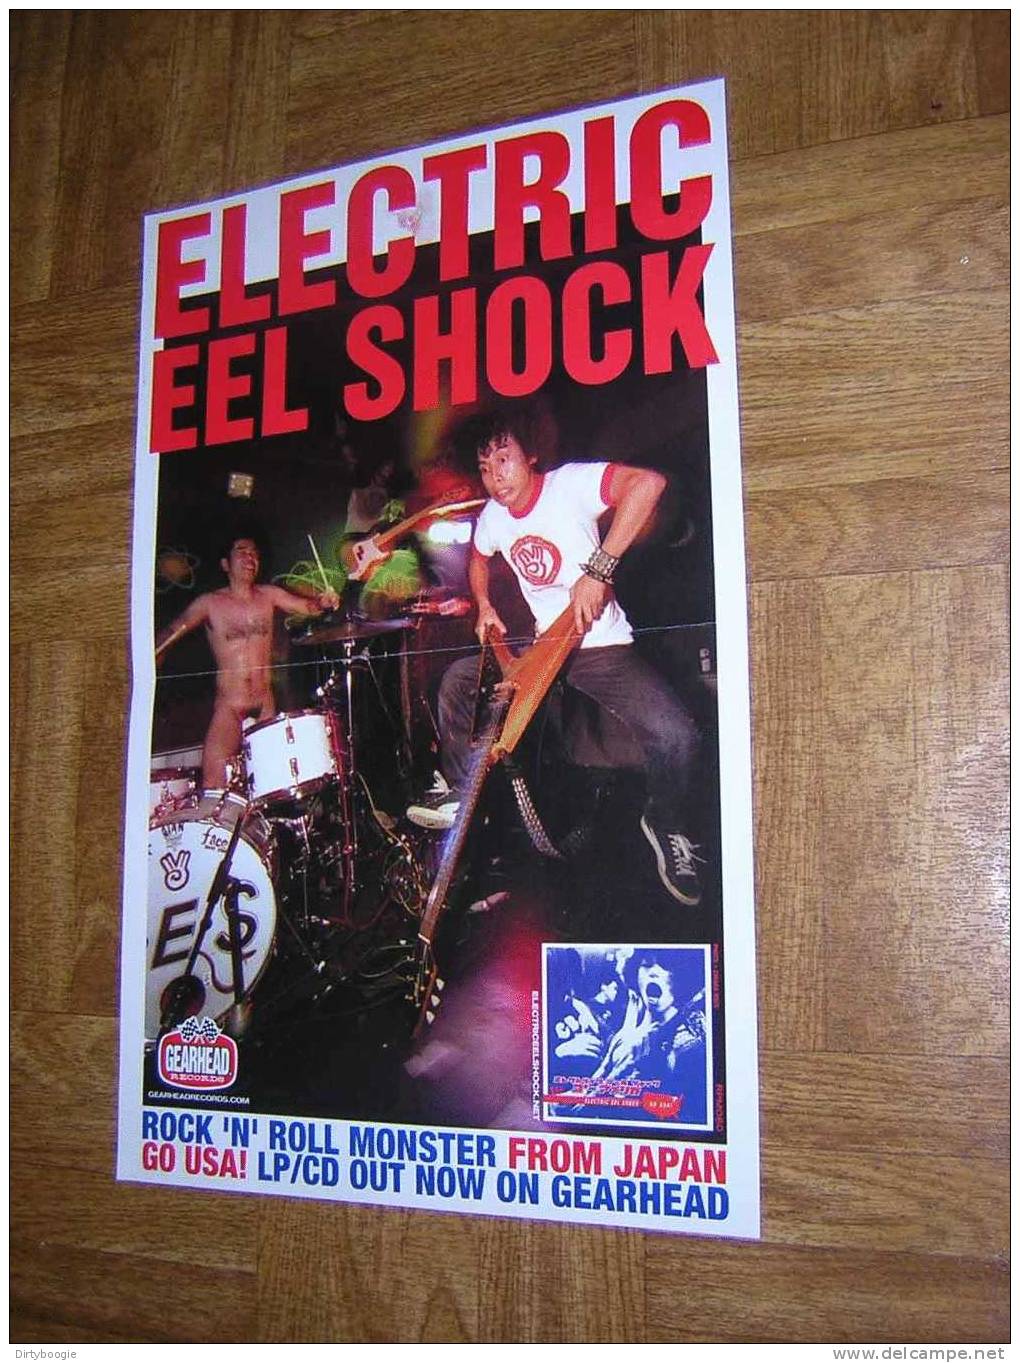 ELECTRIC EEL SHOCK - AFFICHETTE - ROCK'N'ROLL MONSTER FROM JAPAN - GEARHEAD RECORDS - Affiches & Posters